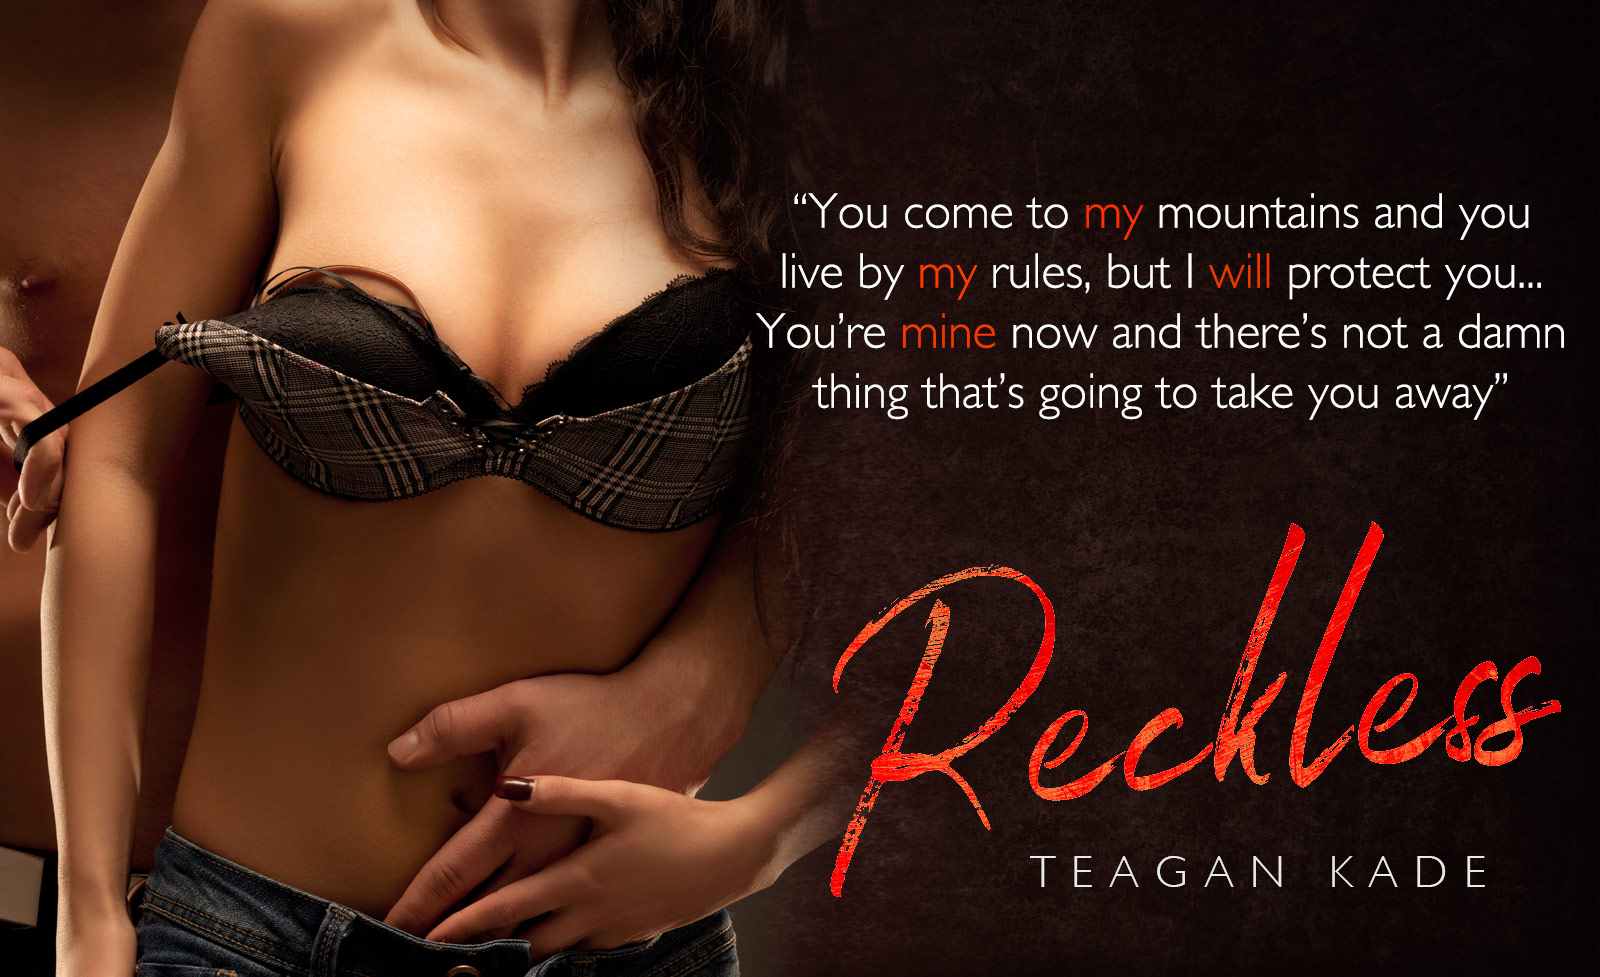 Tegan Kade Reckless: Cover Reveal - Four Chicks flipping pages